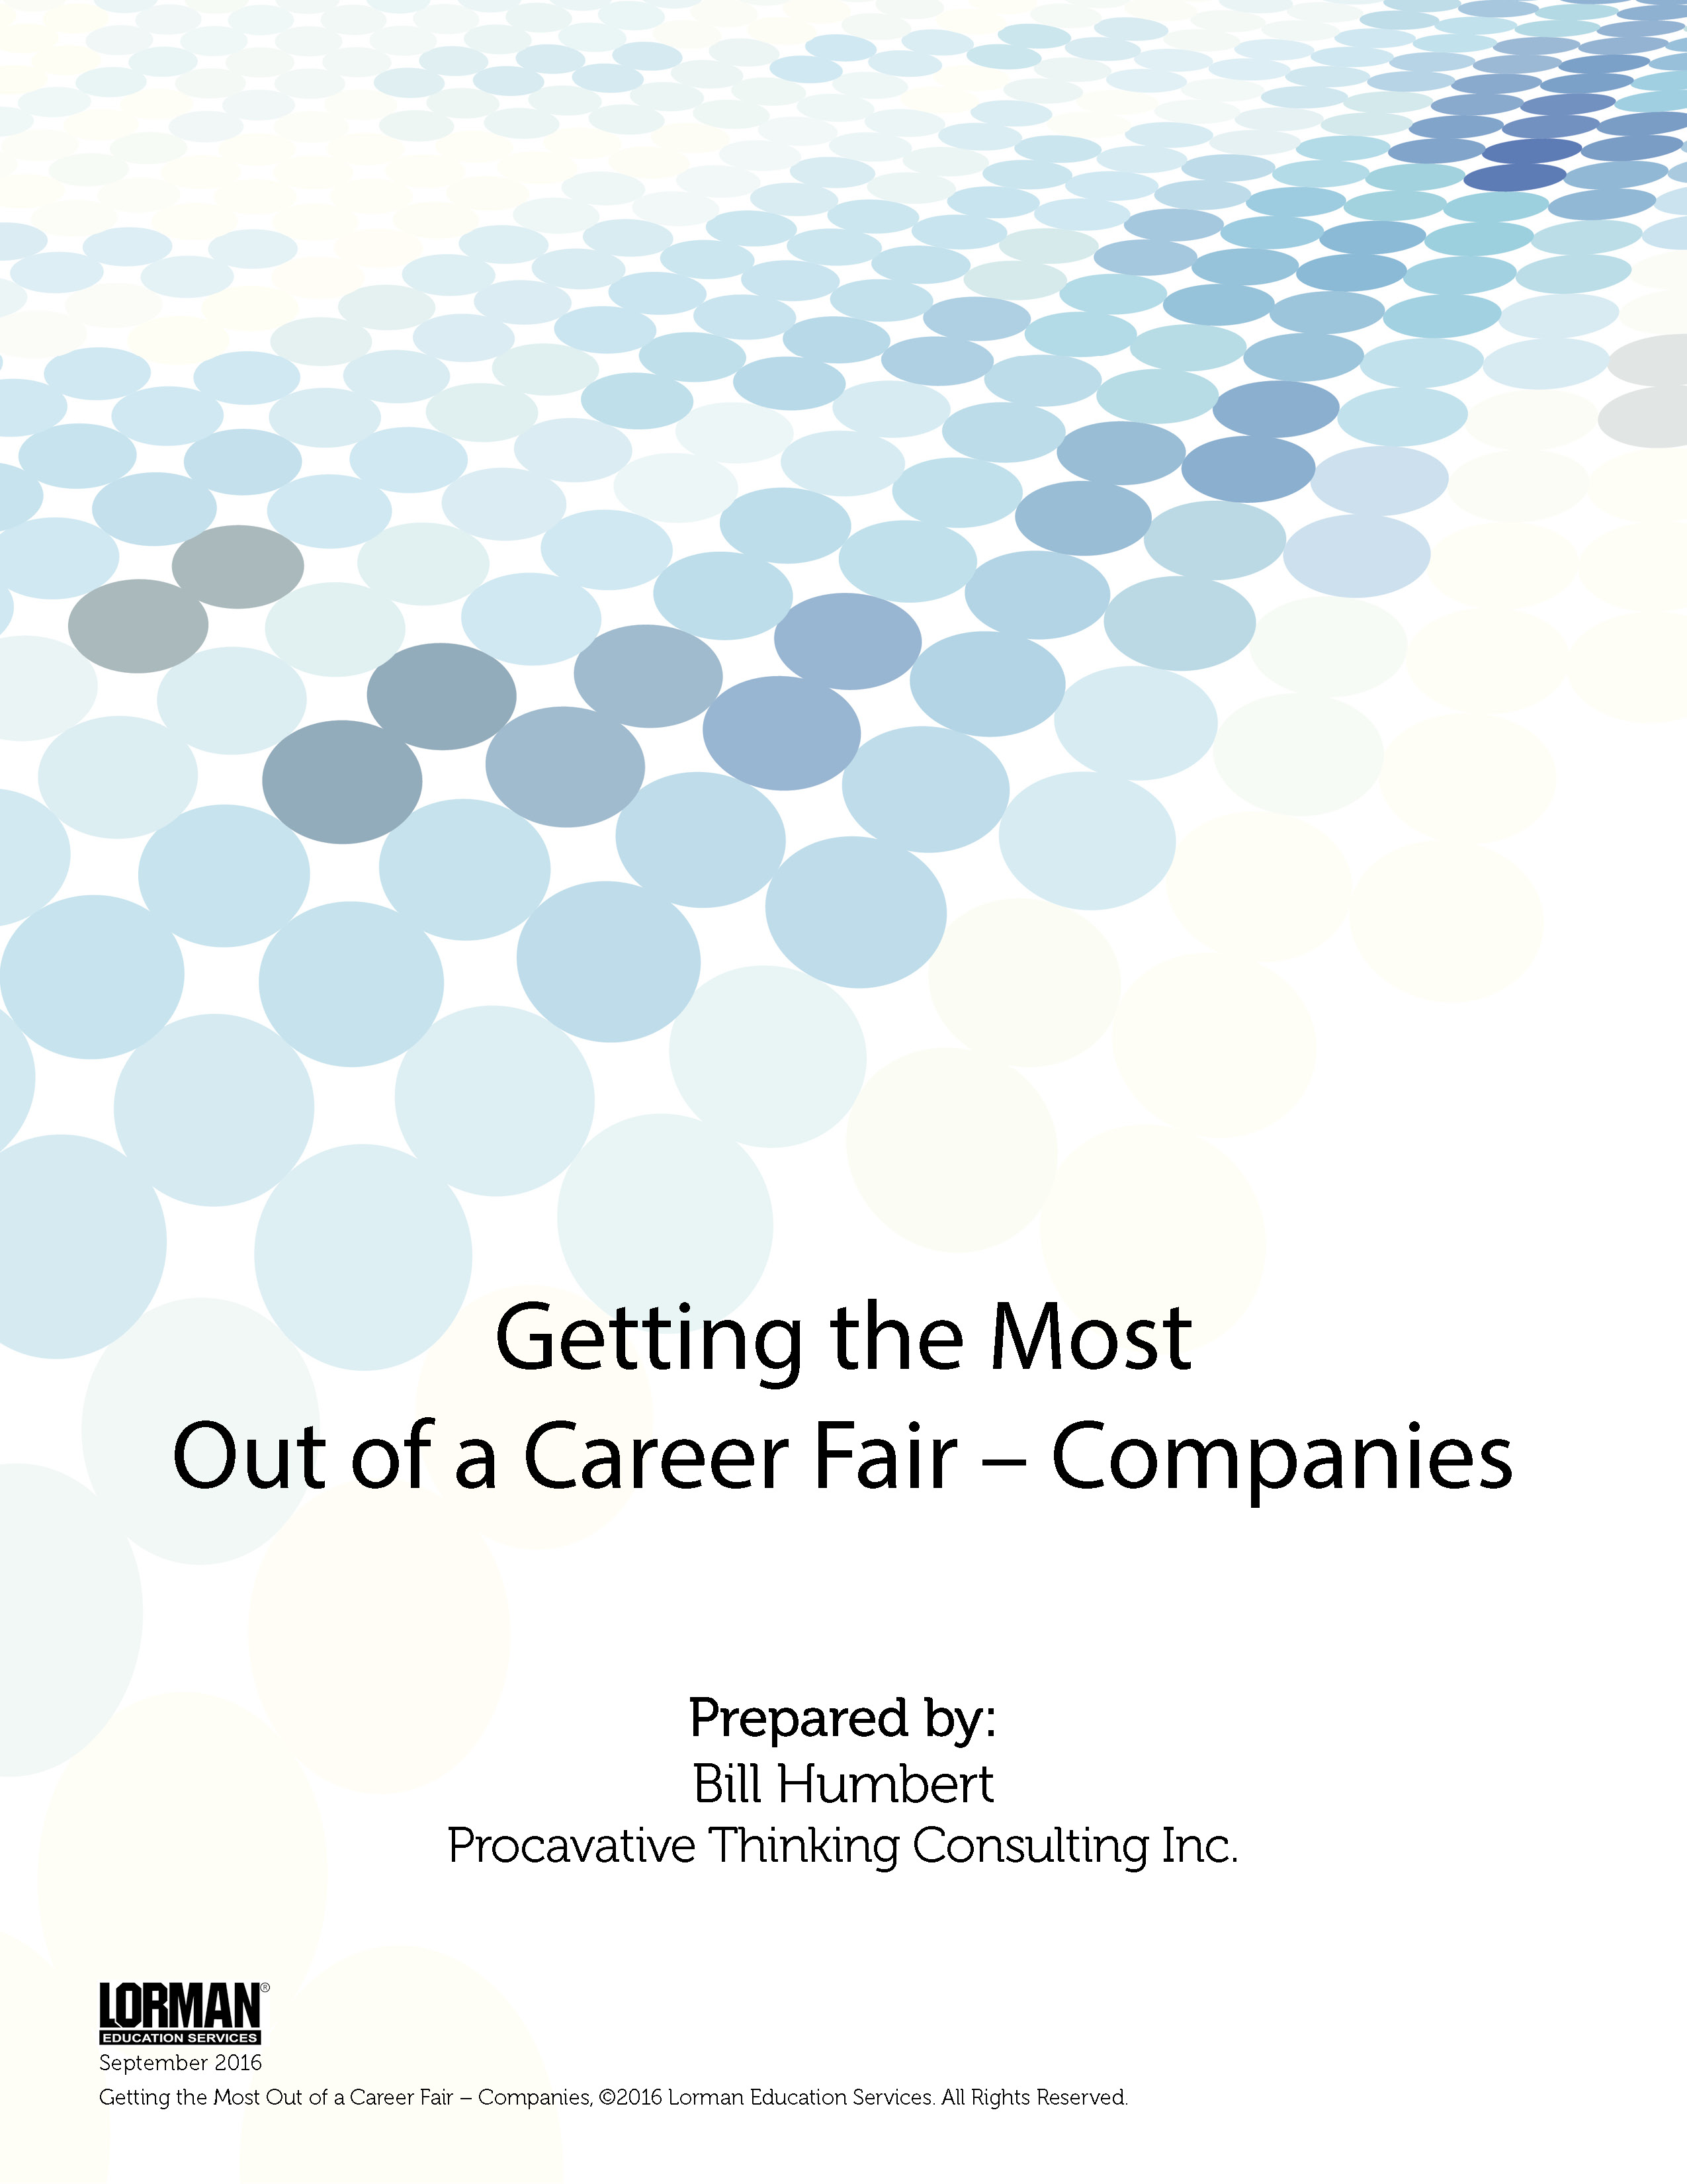 Getting the Most Out of a Career Fair - Companies